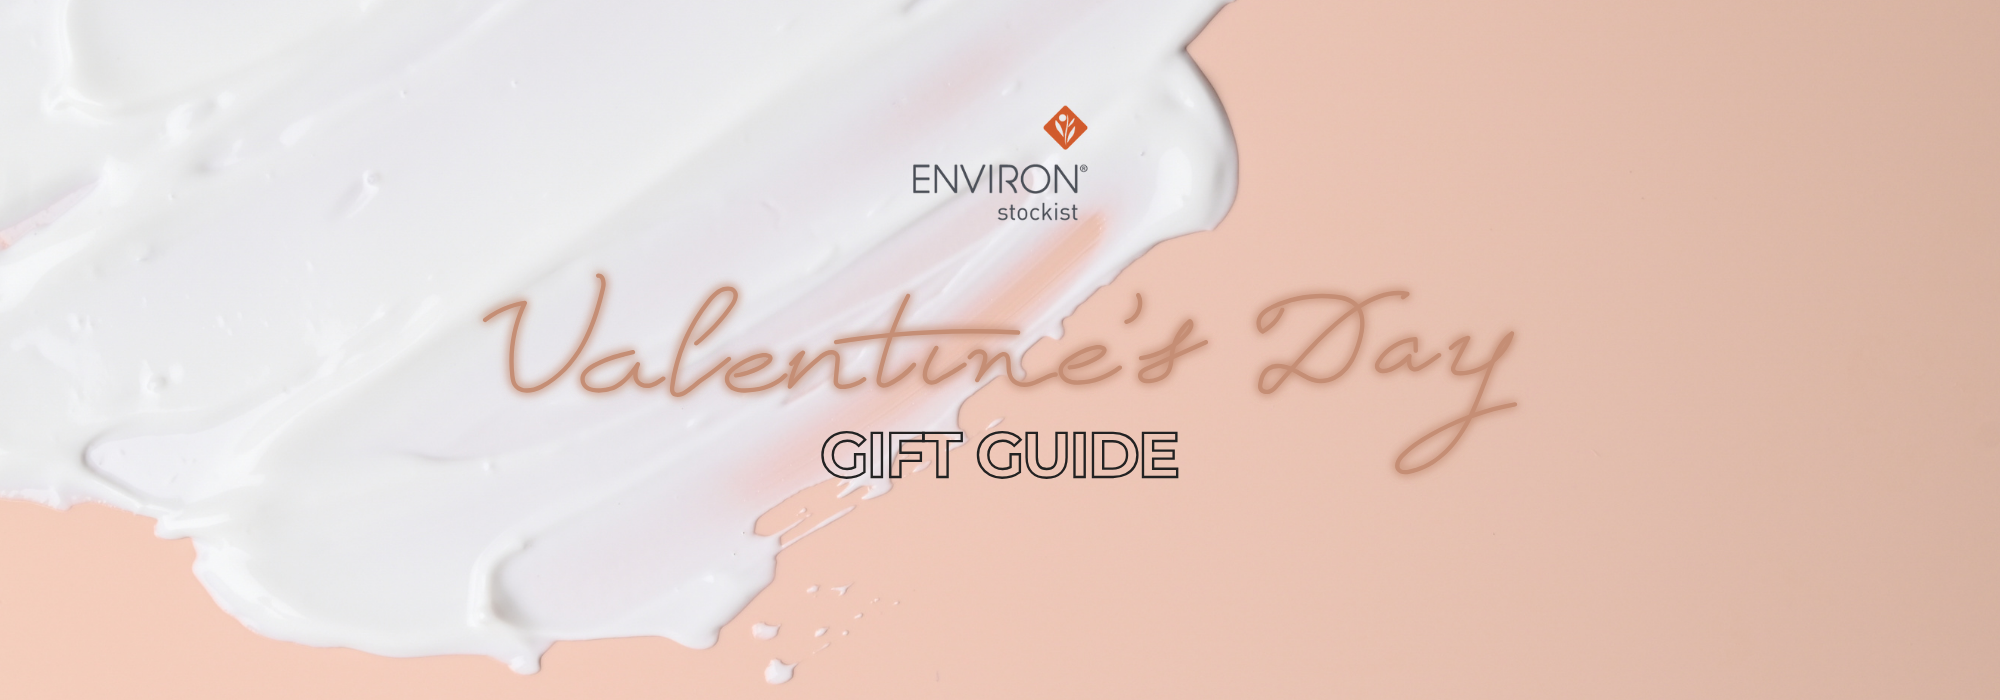 Environ Valentine's Day Gift Guide